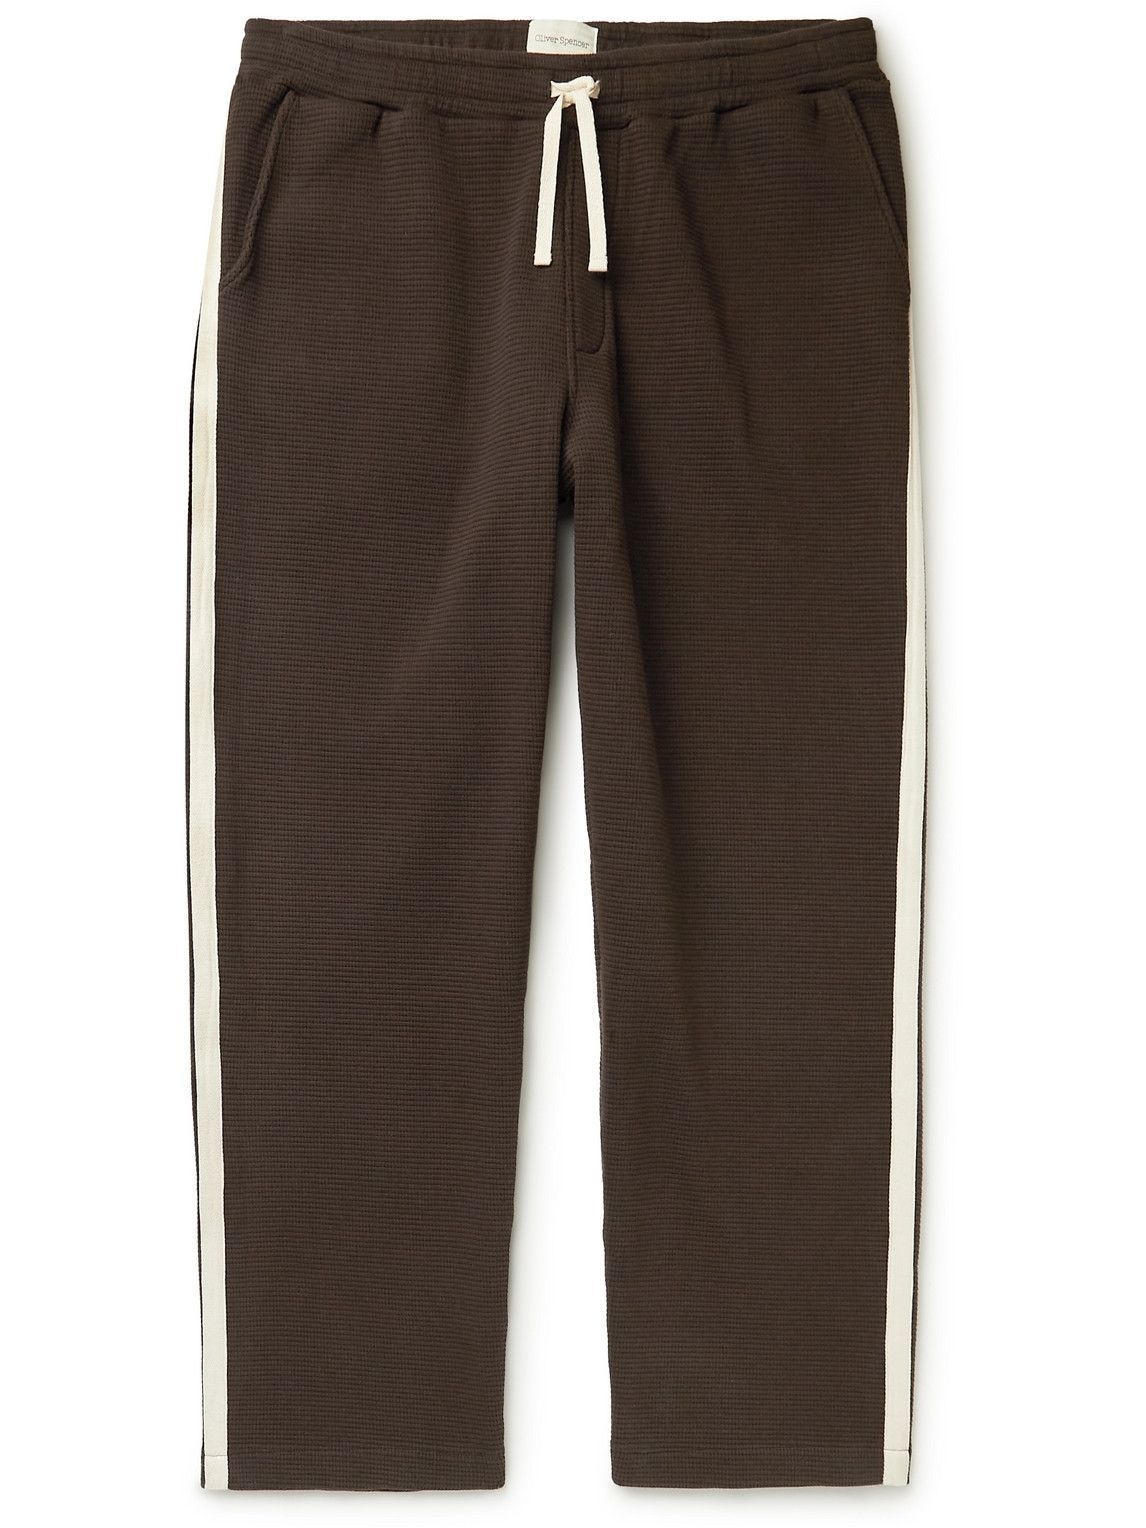 Photo: Oliver Spencer - Morwell Straight-Leg Waffle-Knit Organic Cotton Sweatpants - Brown